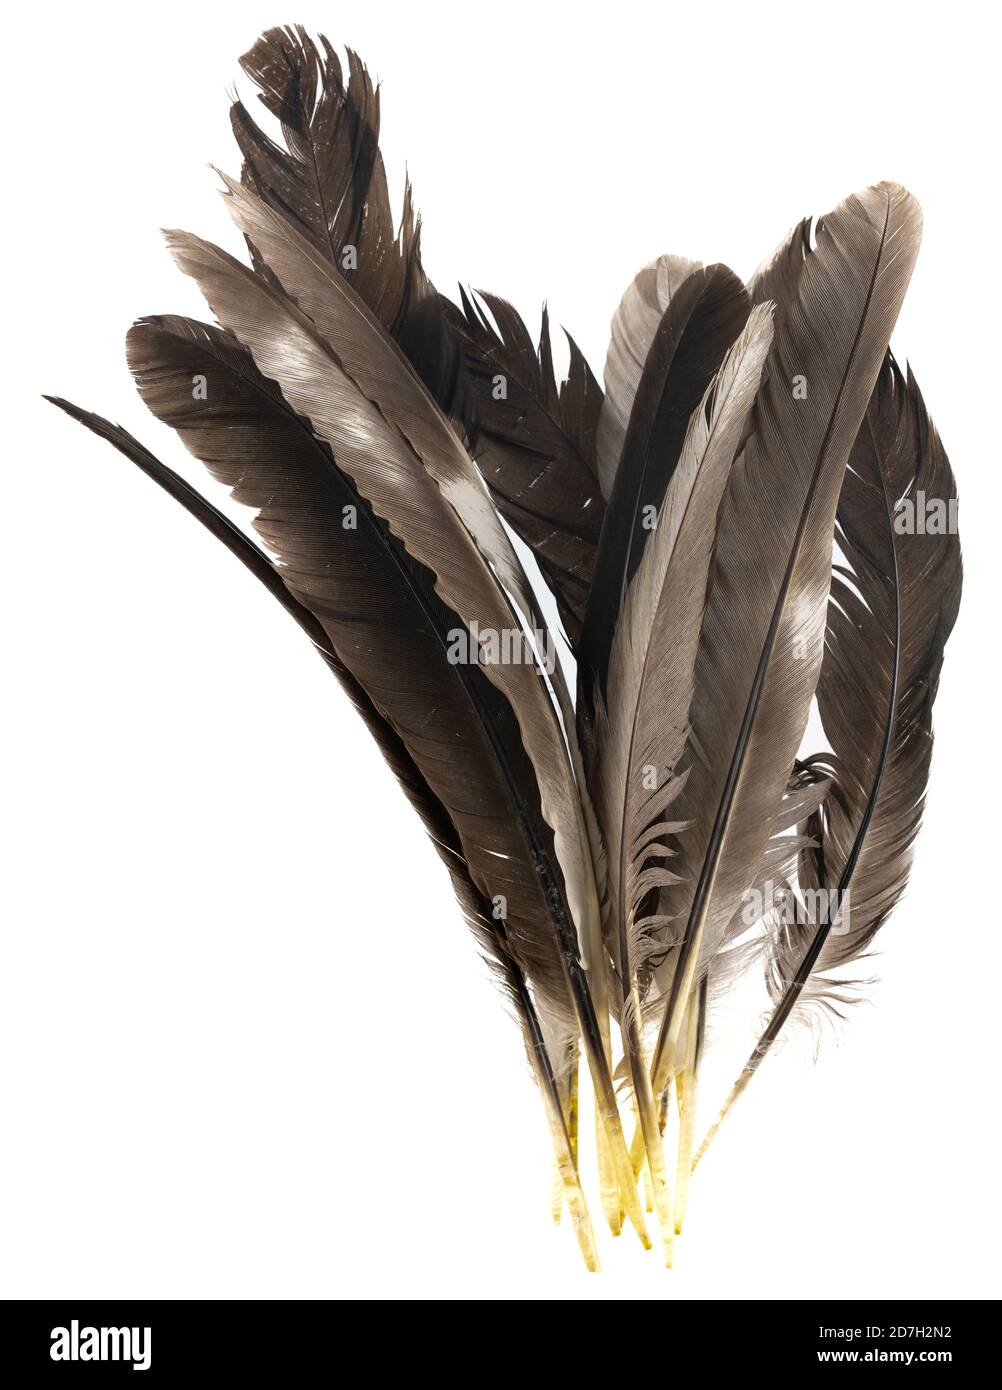 Natural bird feathers isolated on a white background. pigeon and goose  feathers close-up Stock Photo